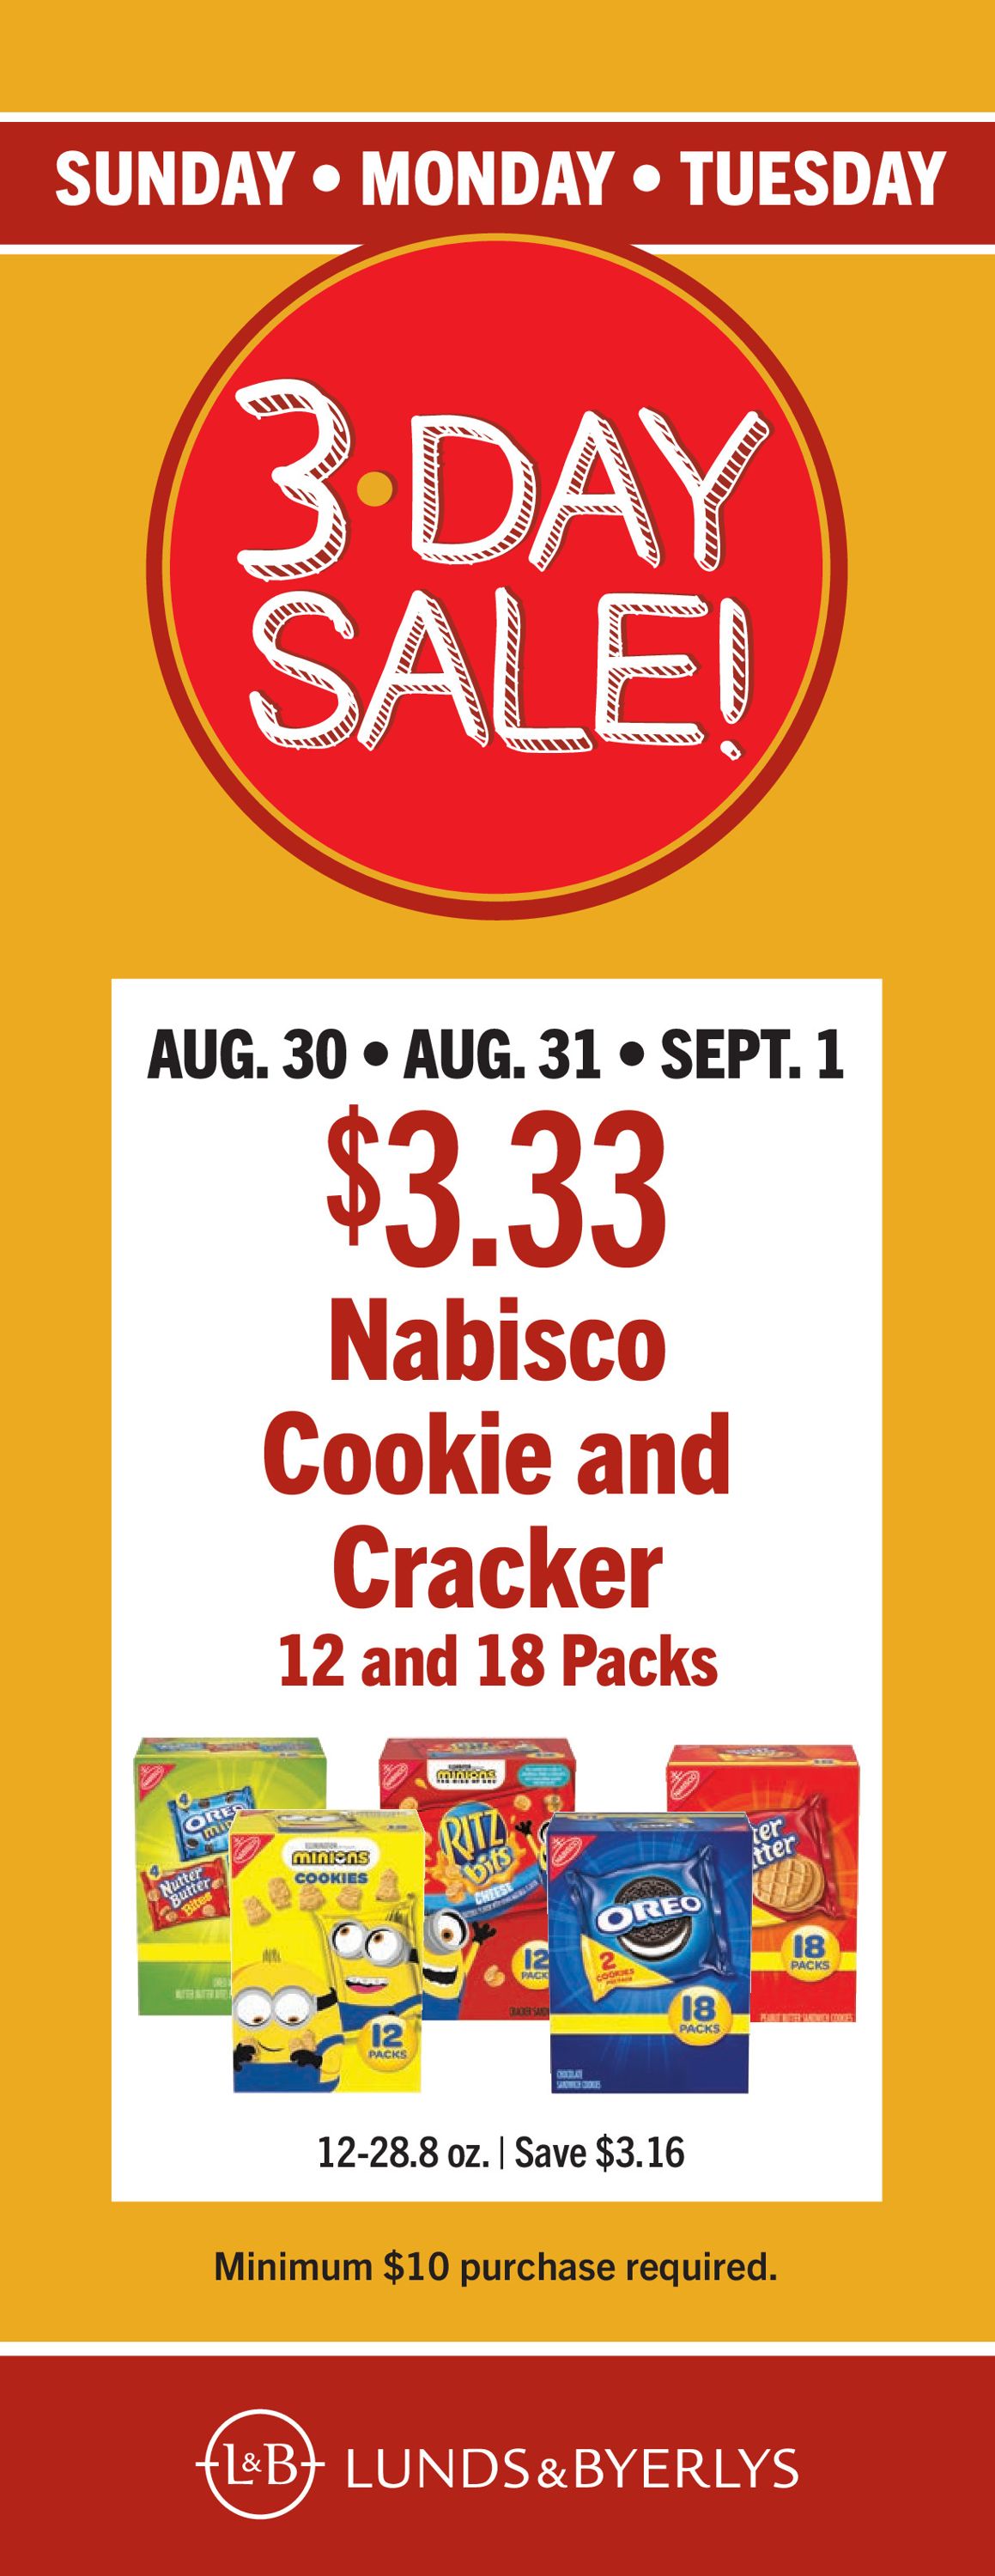 Lunds & Byerlys Weekly Ad Circular - valid 08/27-09/02/2020 (Page 6)